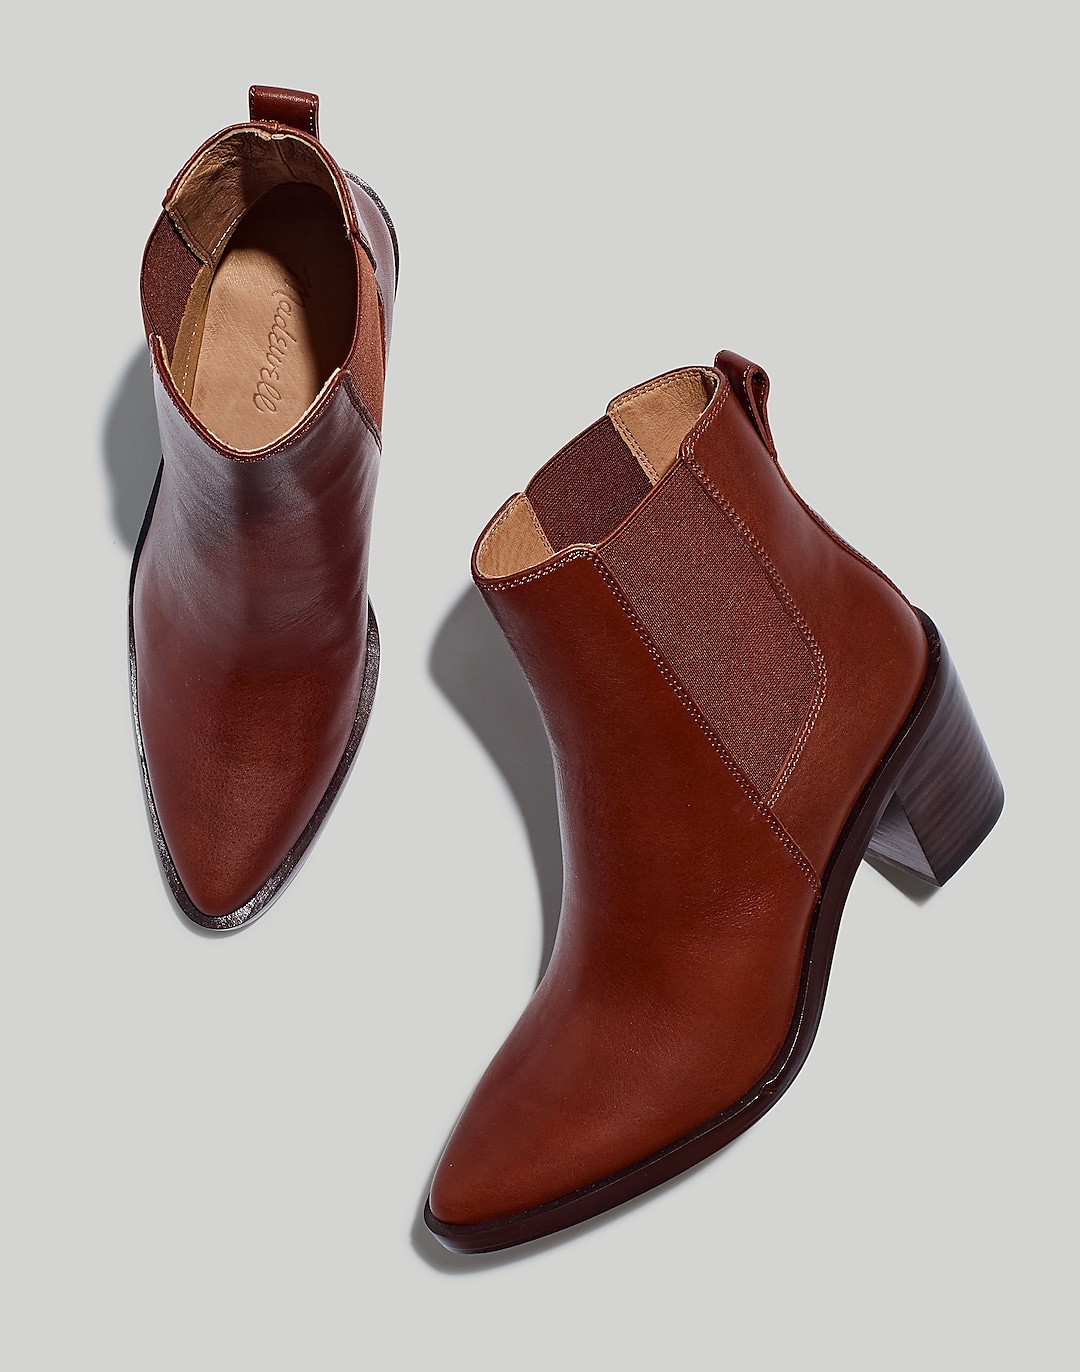 The Elspeth Chelsea Boot | Madewell